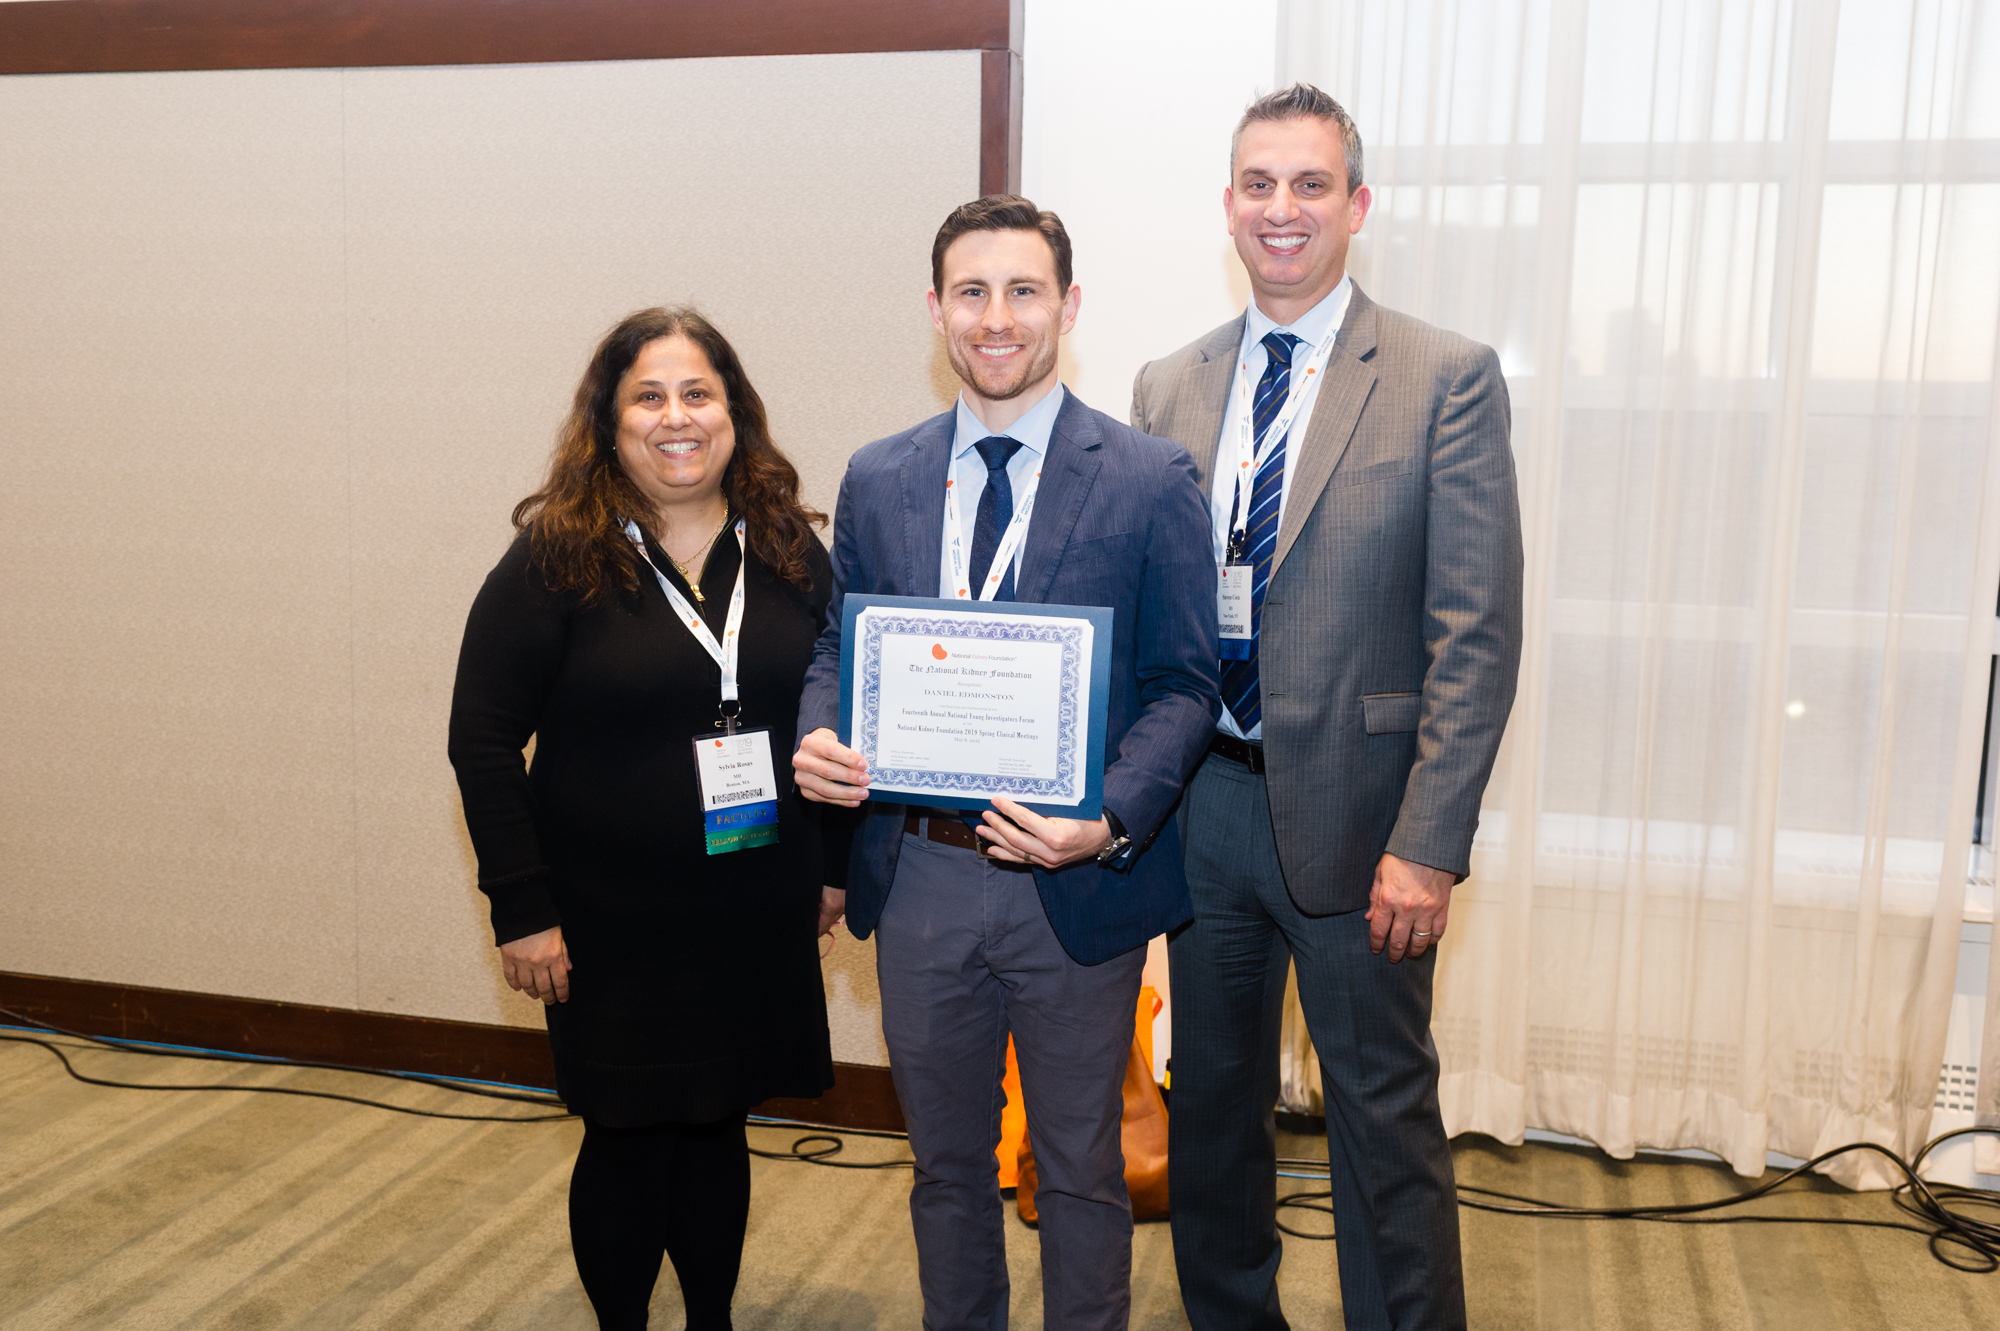 Dr Daniel Edmonston receiving the 2nd Place Young Investigators Forum Award with two representatives of the National Kidney Foundation